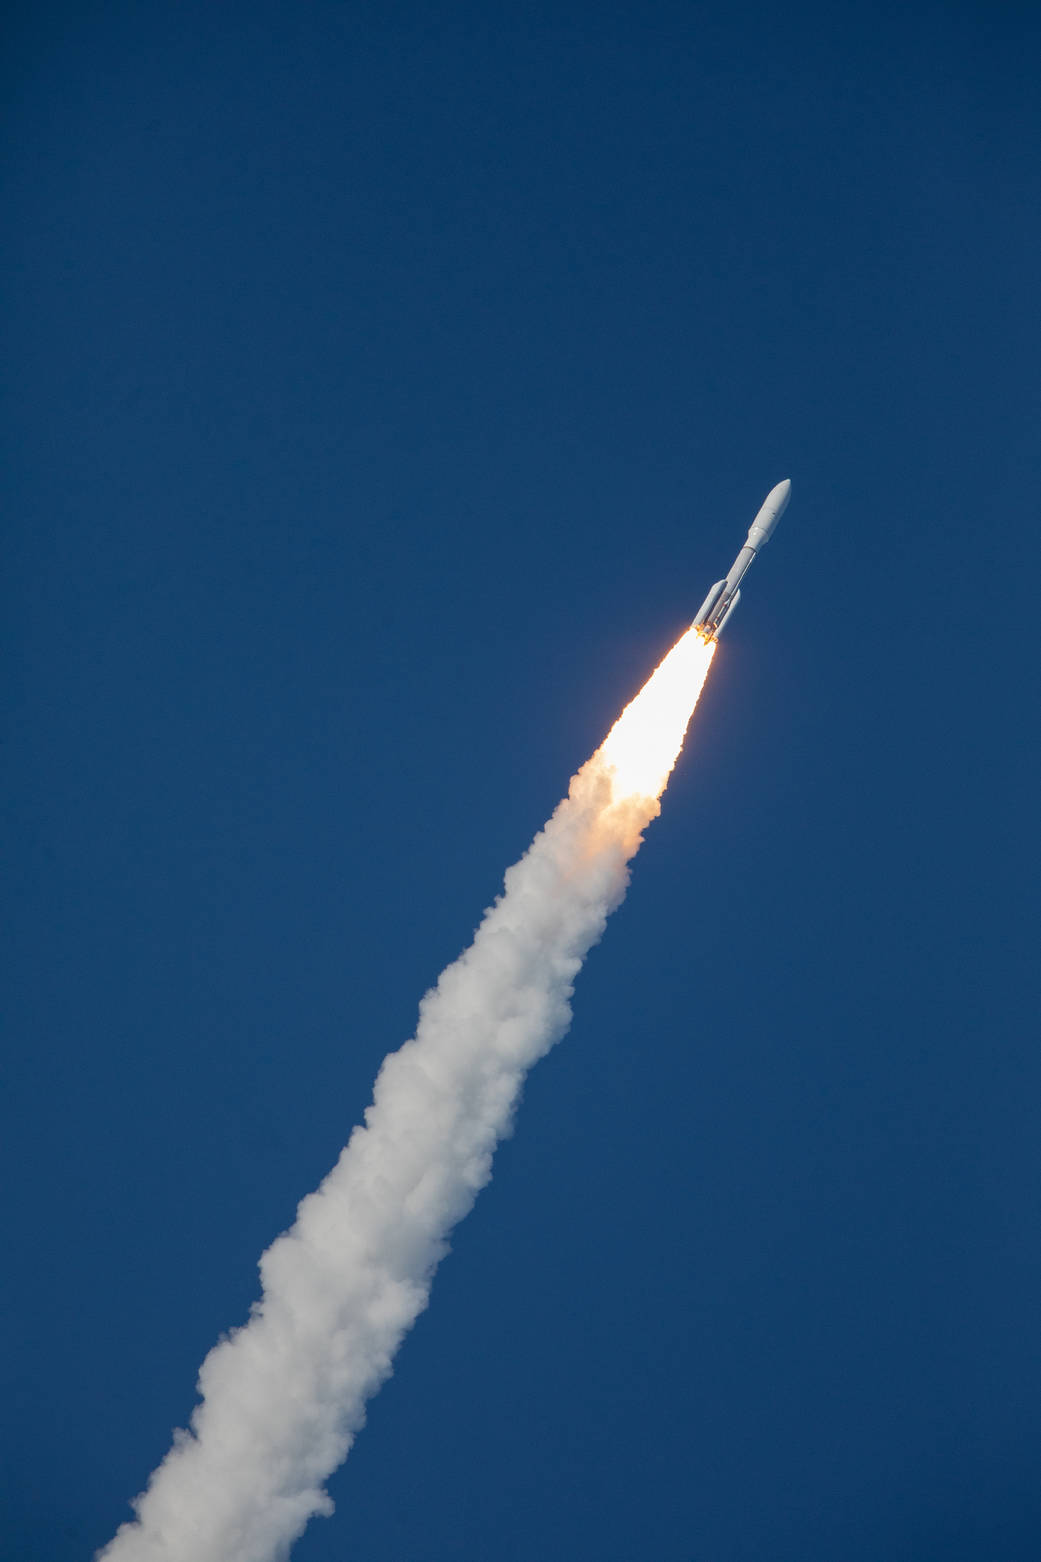 GOES-T launch March 1, 2022